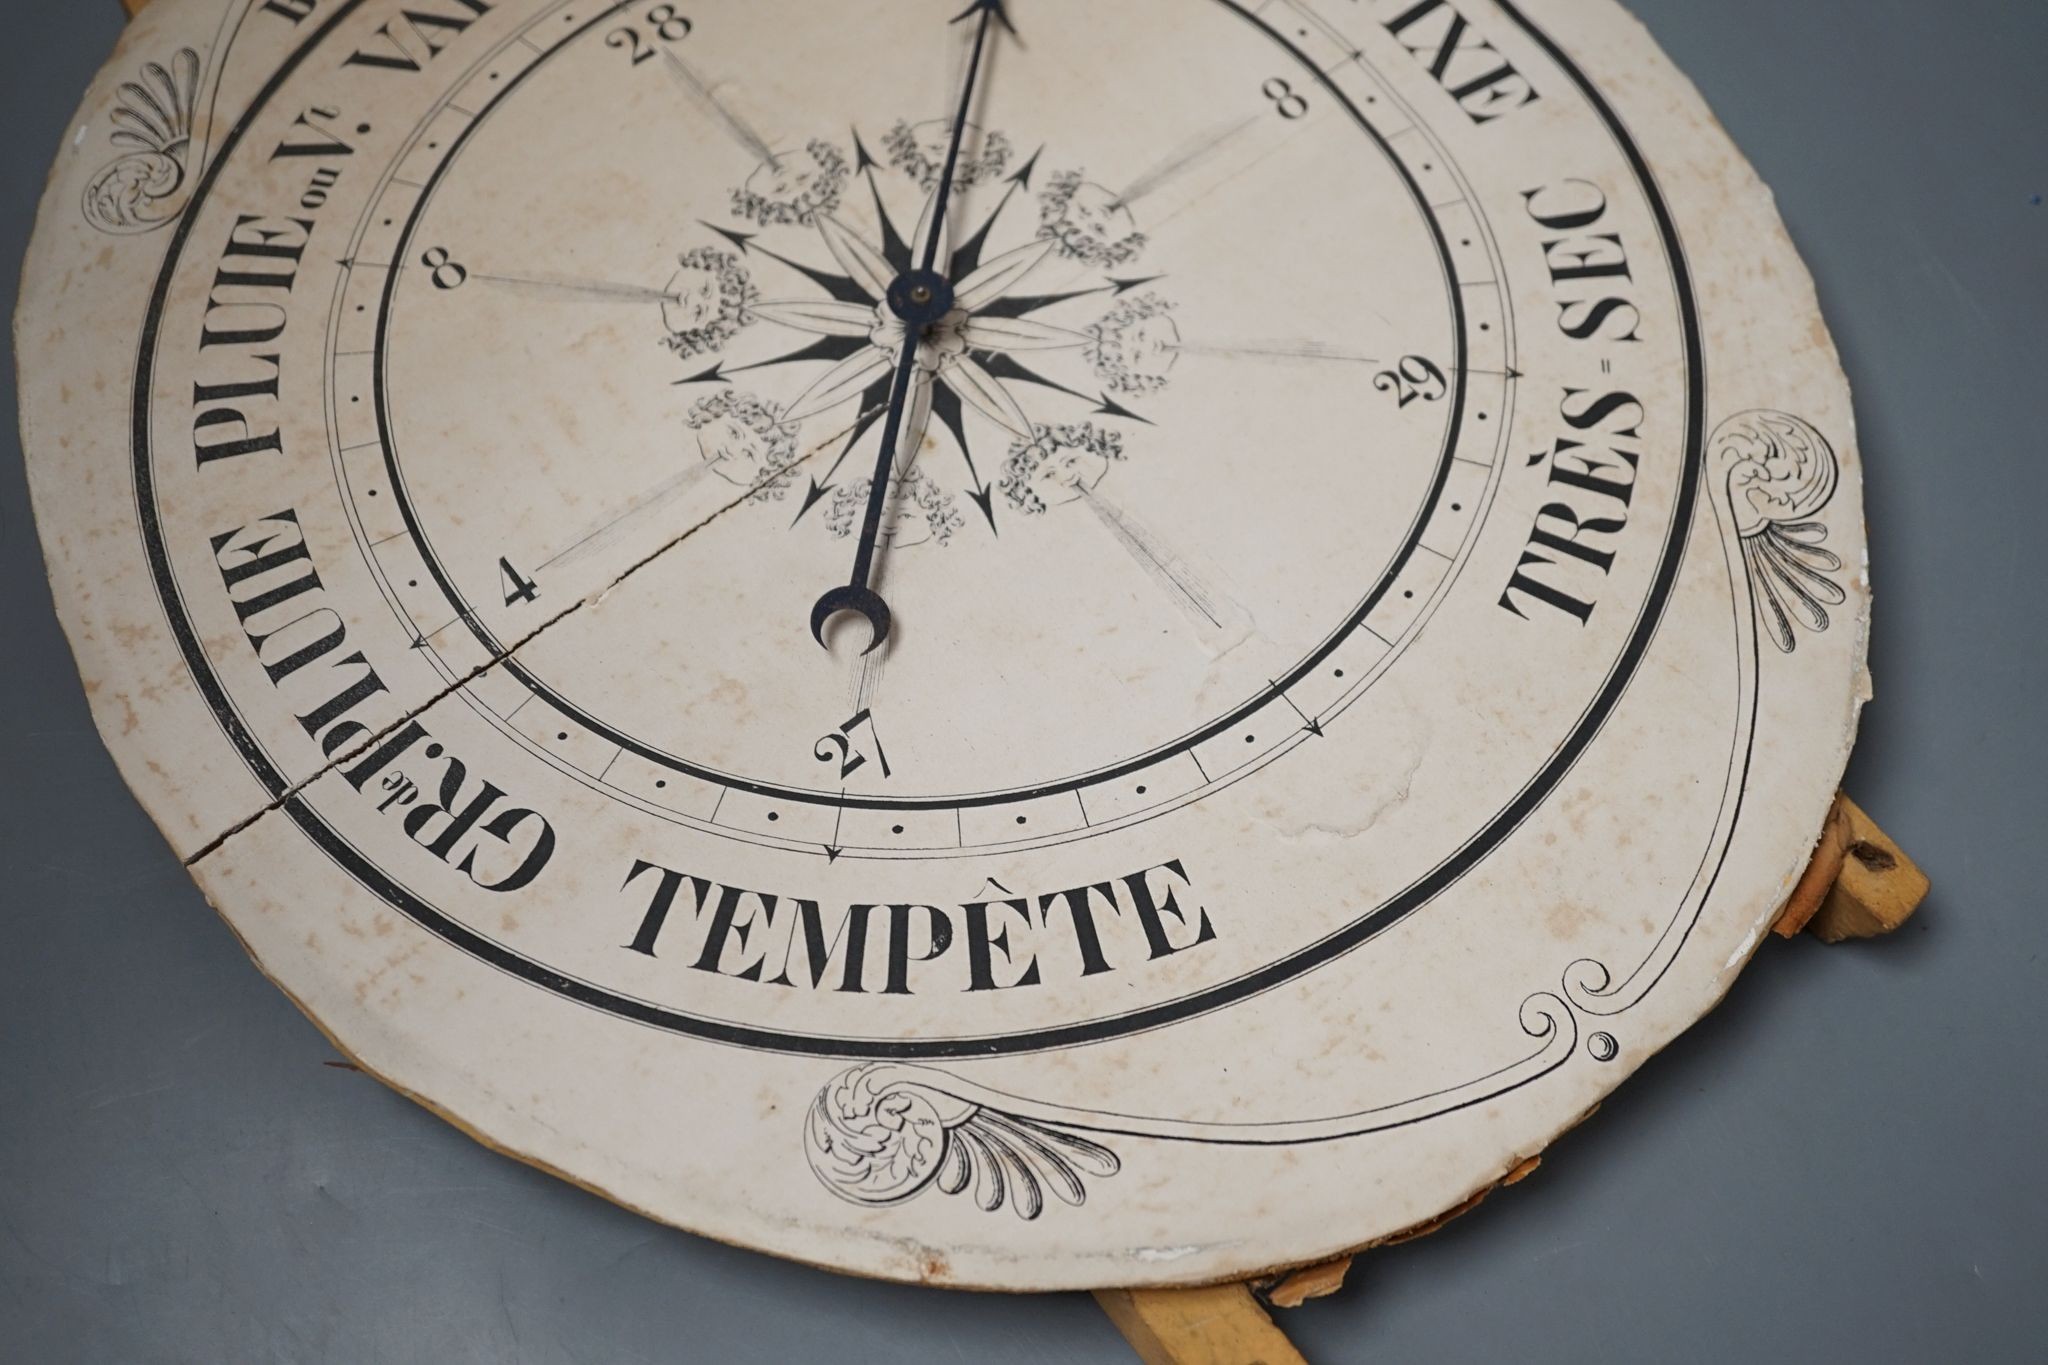 A 19th century printed barometer dial 38cm